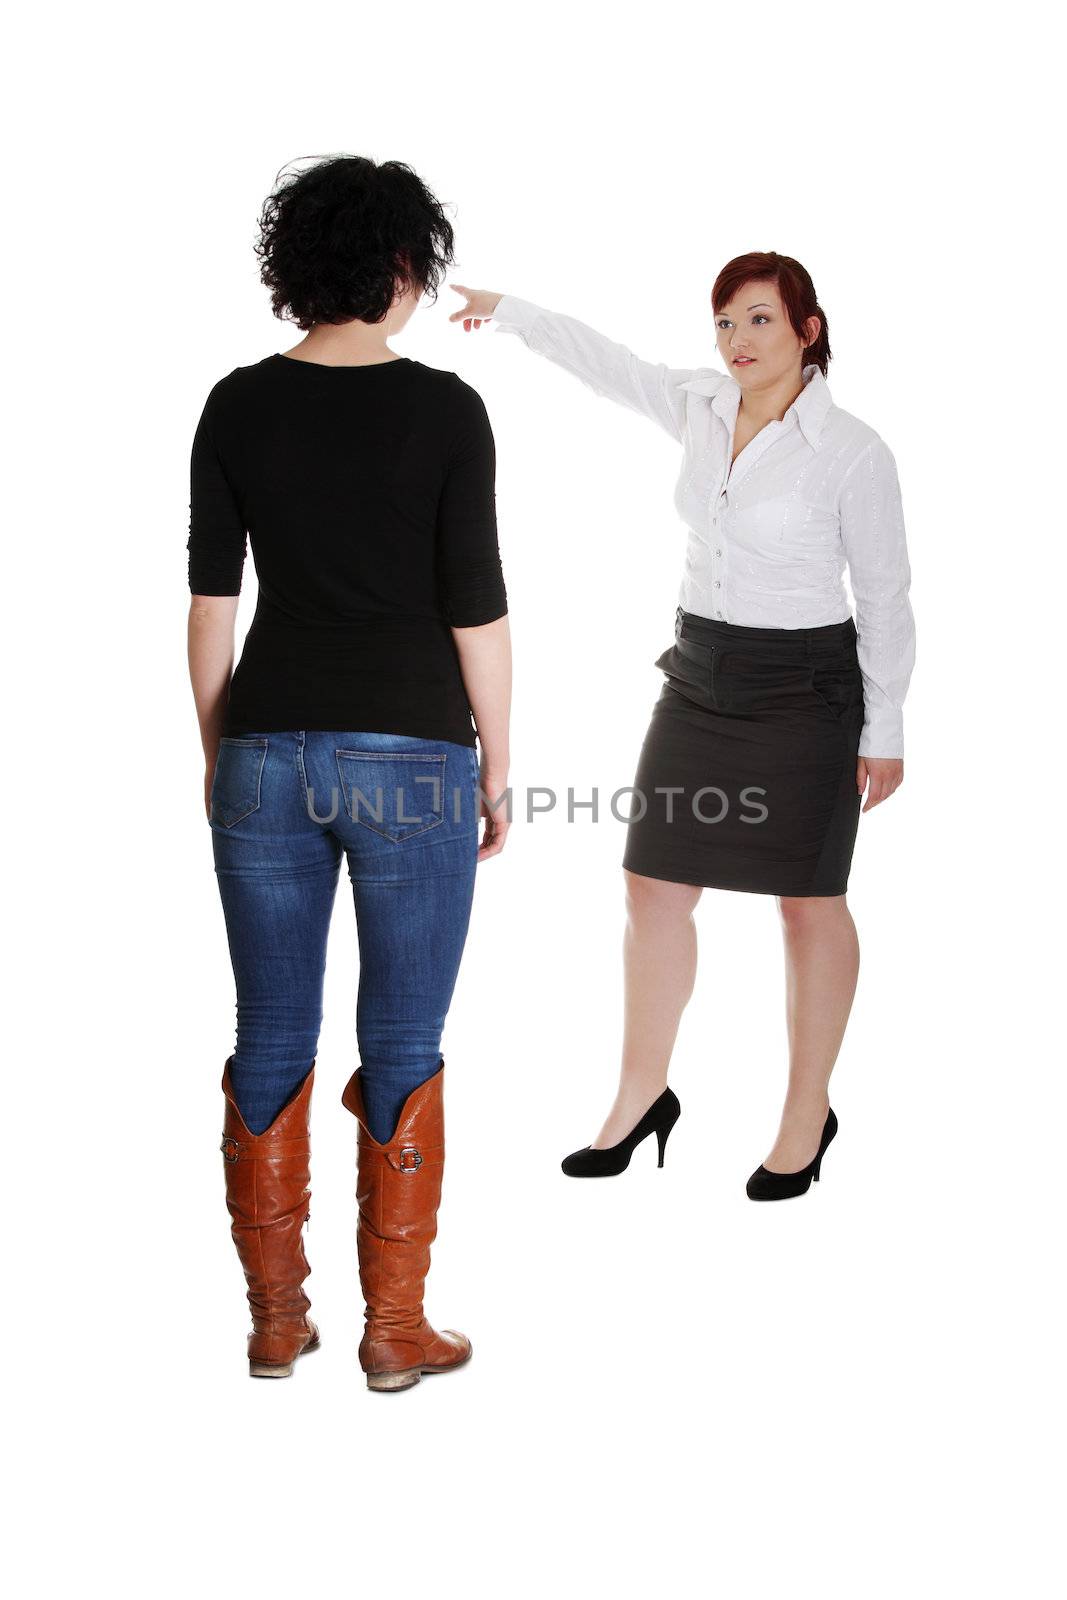 Businesswoman giving reprimand to worker. by BDS